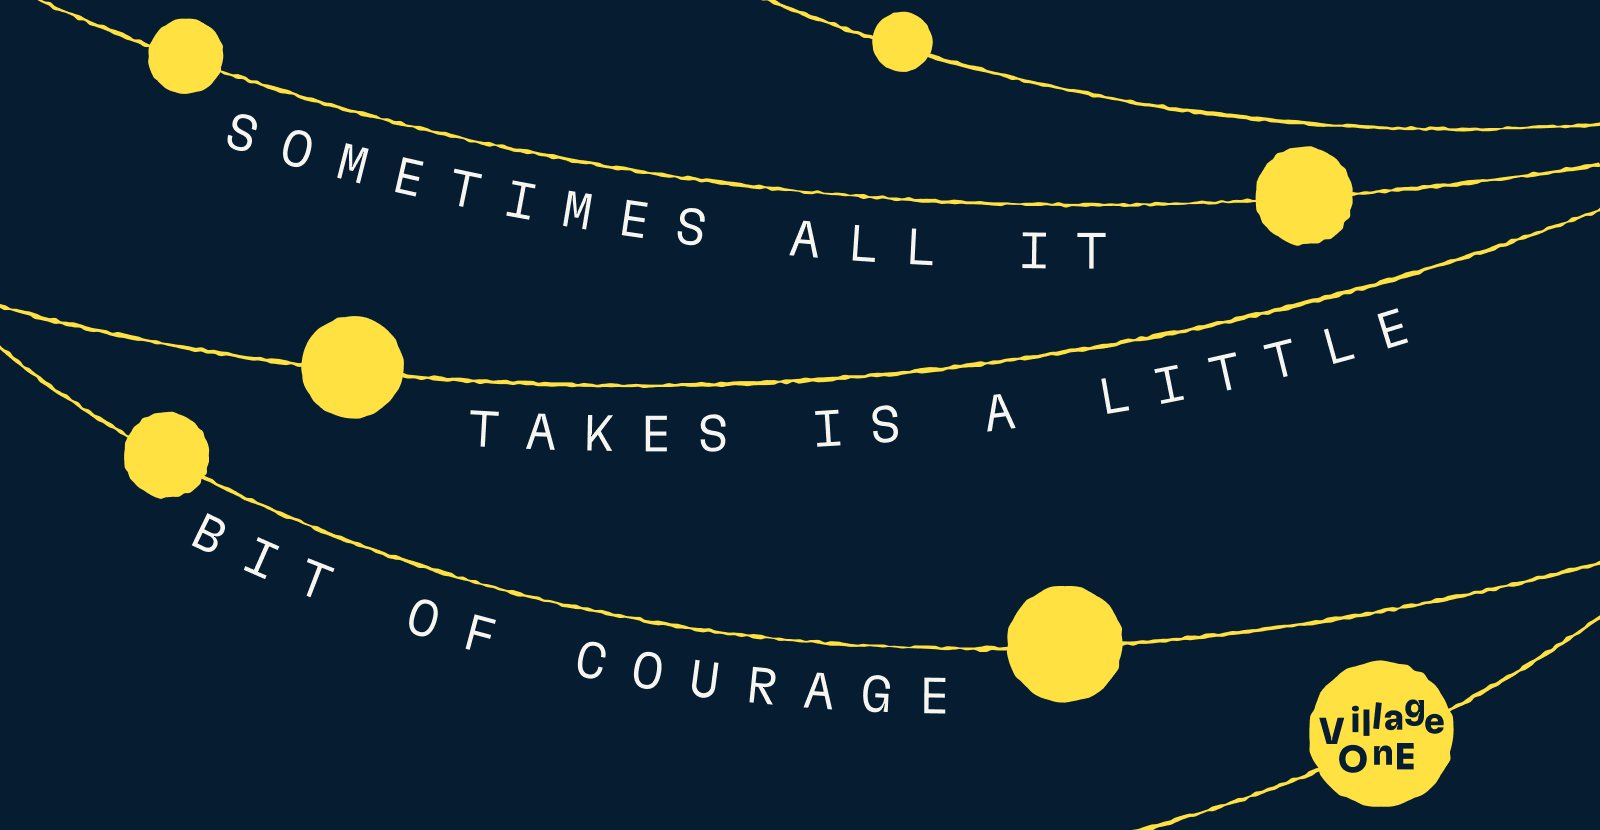 A festive motive stating “Sometimes all it takes is a little bit of courage” and the Village One logo in the corner